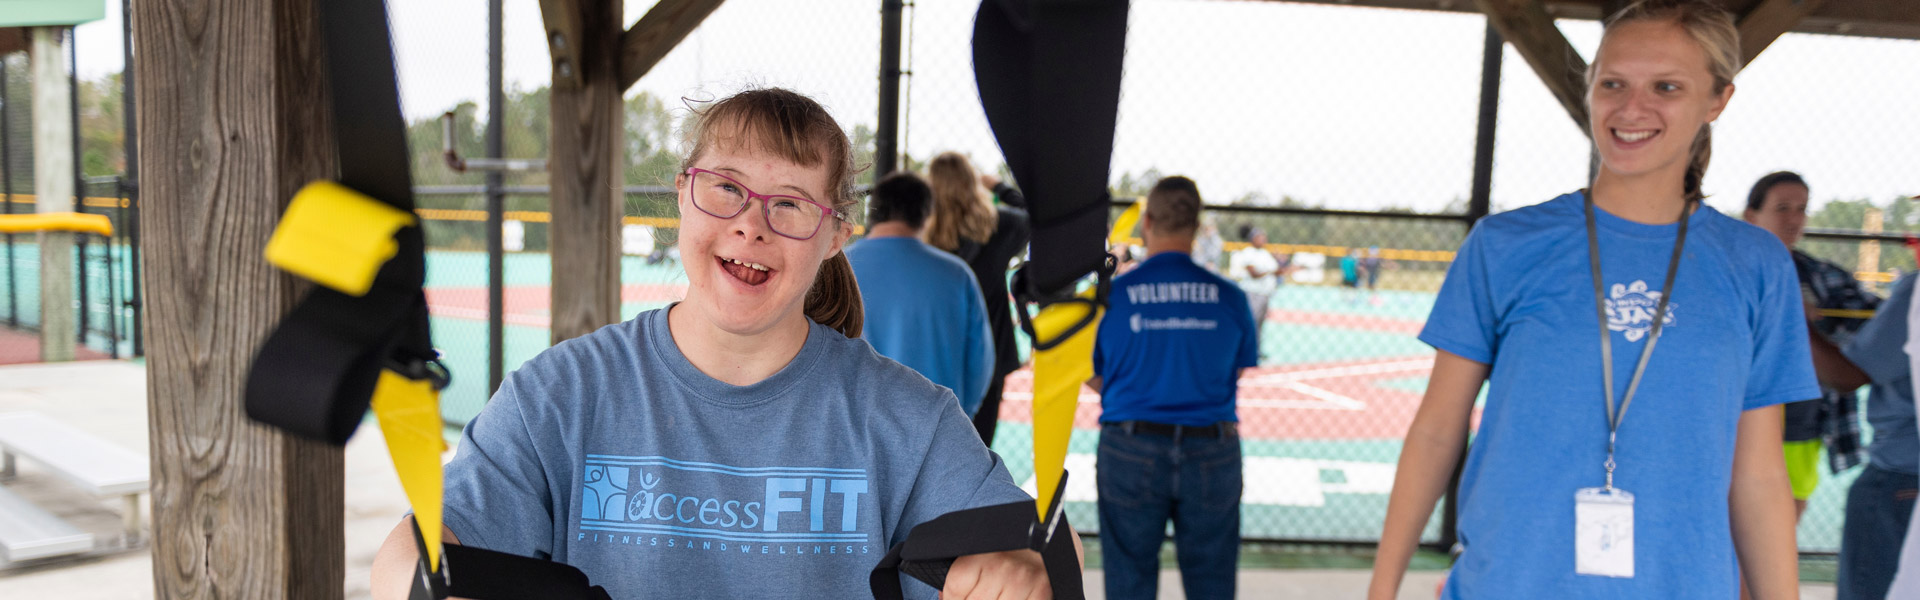 An accessFIT participant smiles while working out with the TRX cables while a recreation therapy student watches.